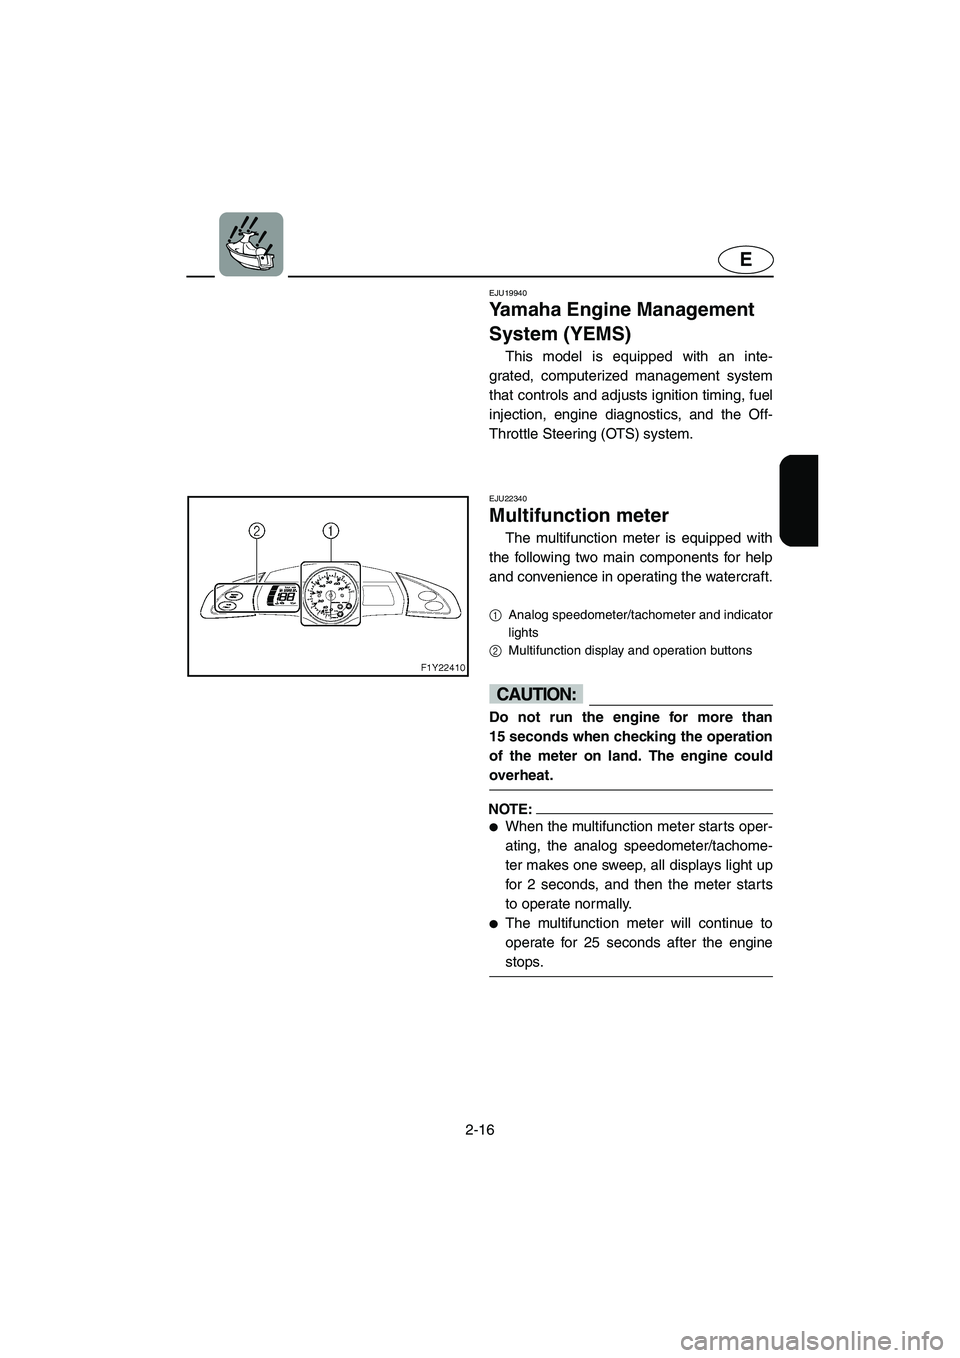 YAMAHA FX CRUISER 2006 Service Manual 2-16
E
EJU19940
Yamaha Engine Management 
System (YEMS) 
This model is equipped with an inte-
grated, computerized management system
that controls and adjusts ignition timing, fuel
injection, engine d